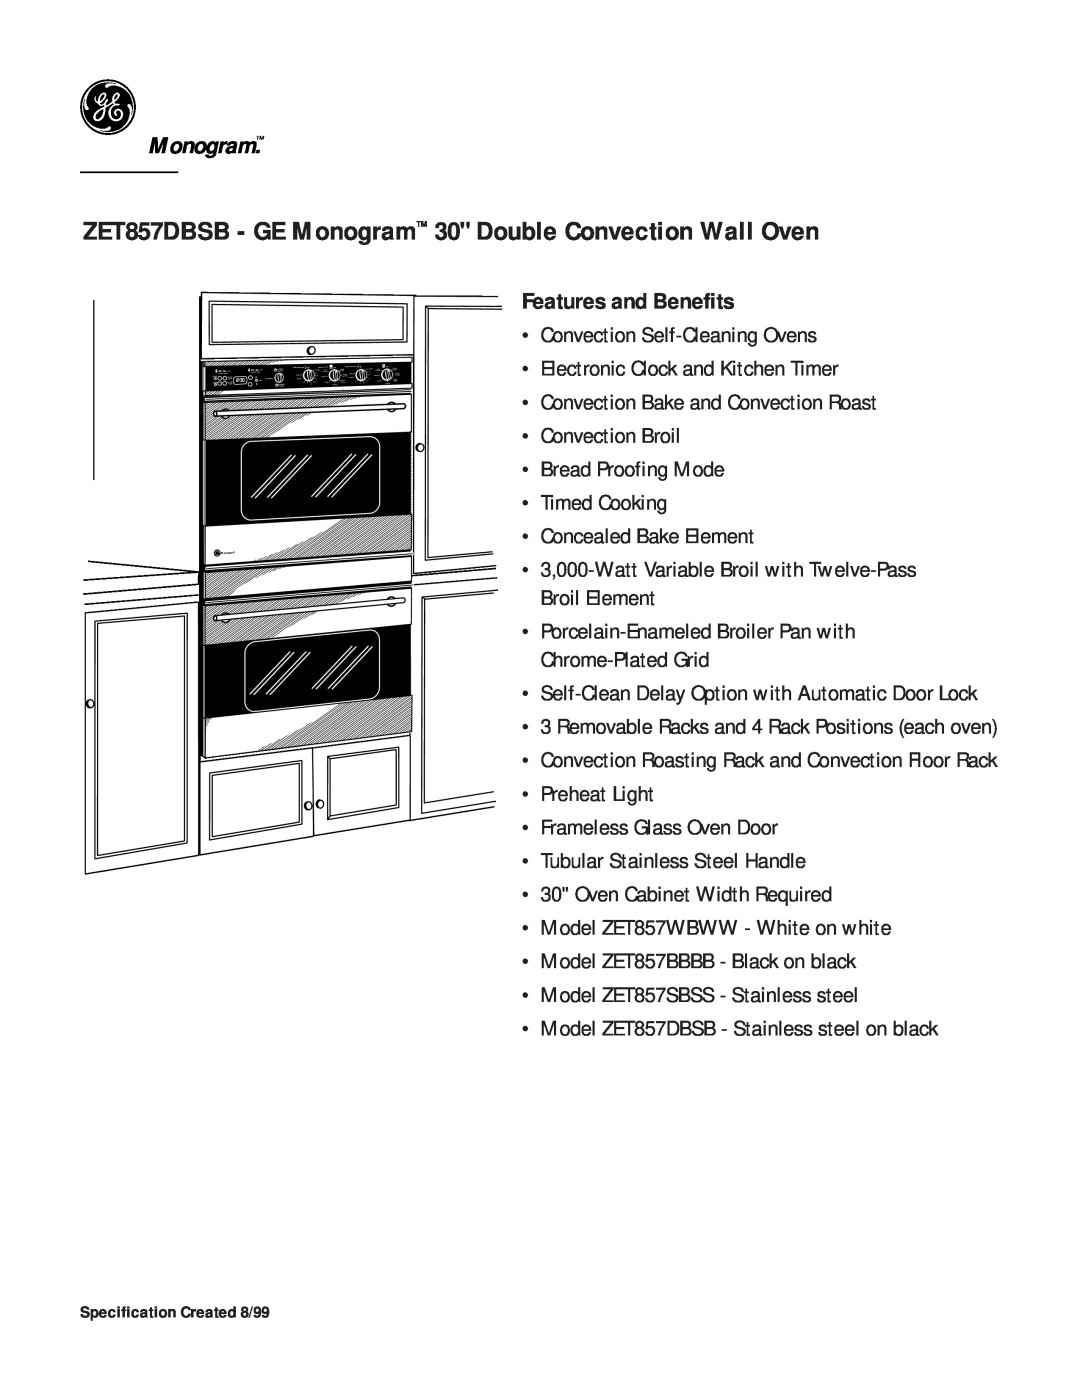 GE Monogram dimensions ZET857DBSB - GE Monogram 30 Double Convection Wall Oven, Features and Benefits 